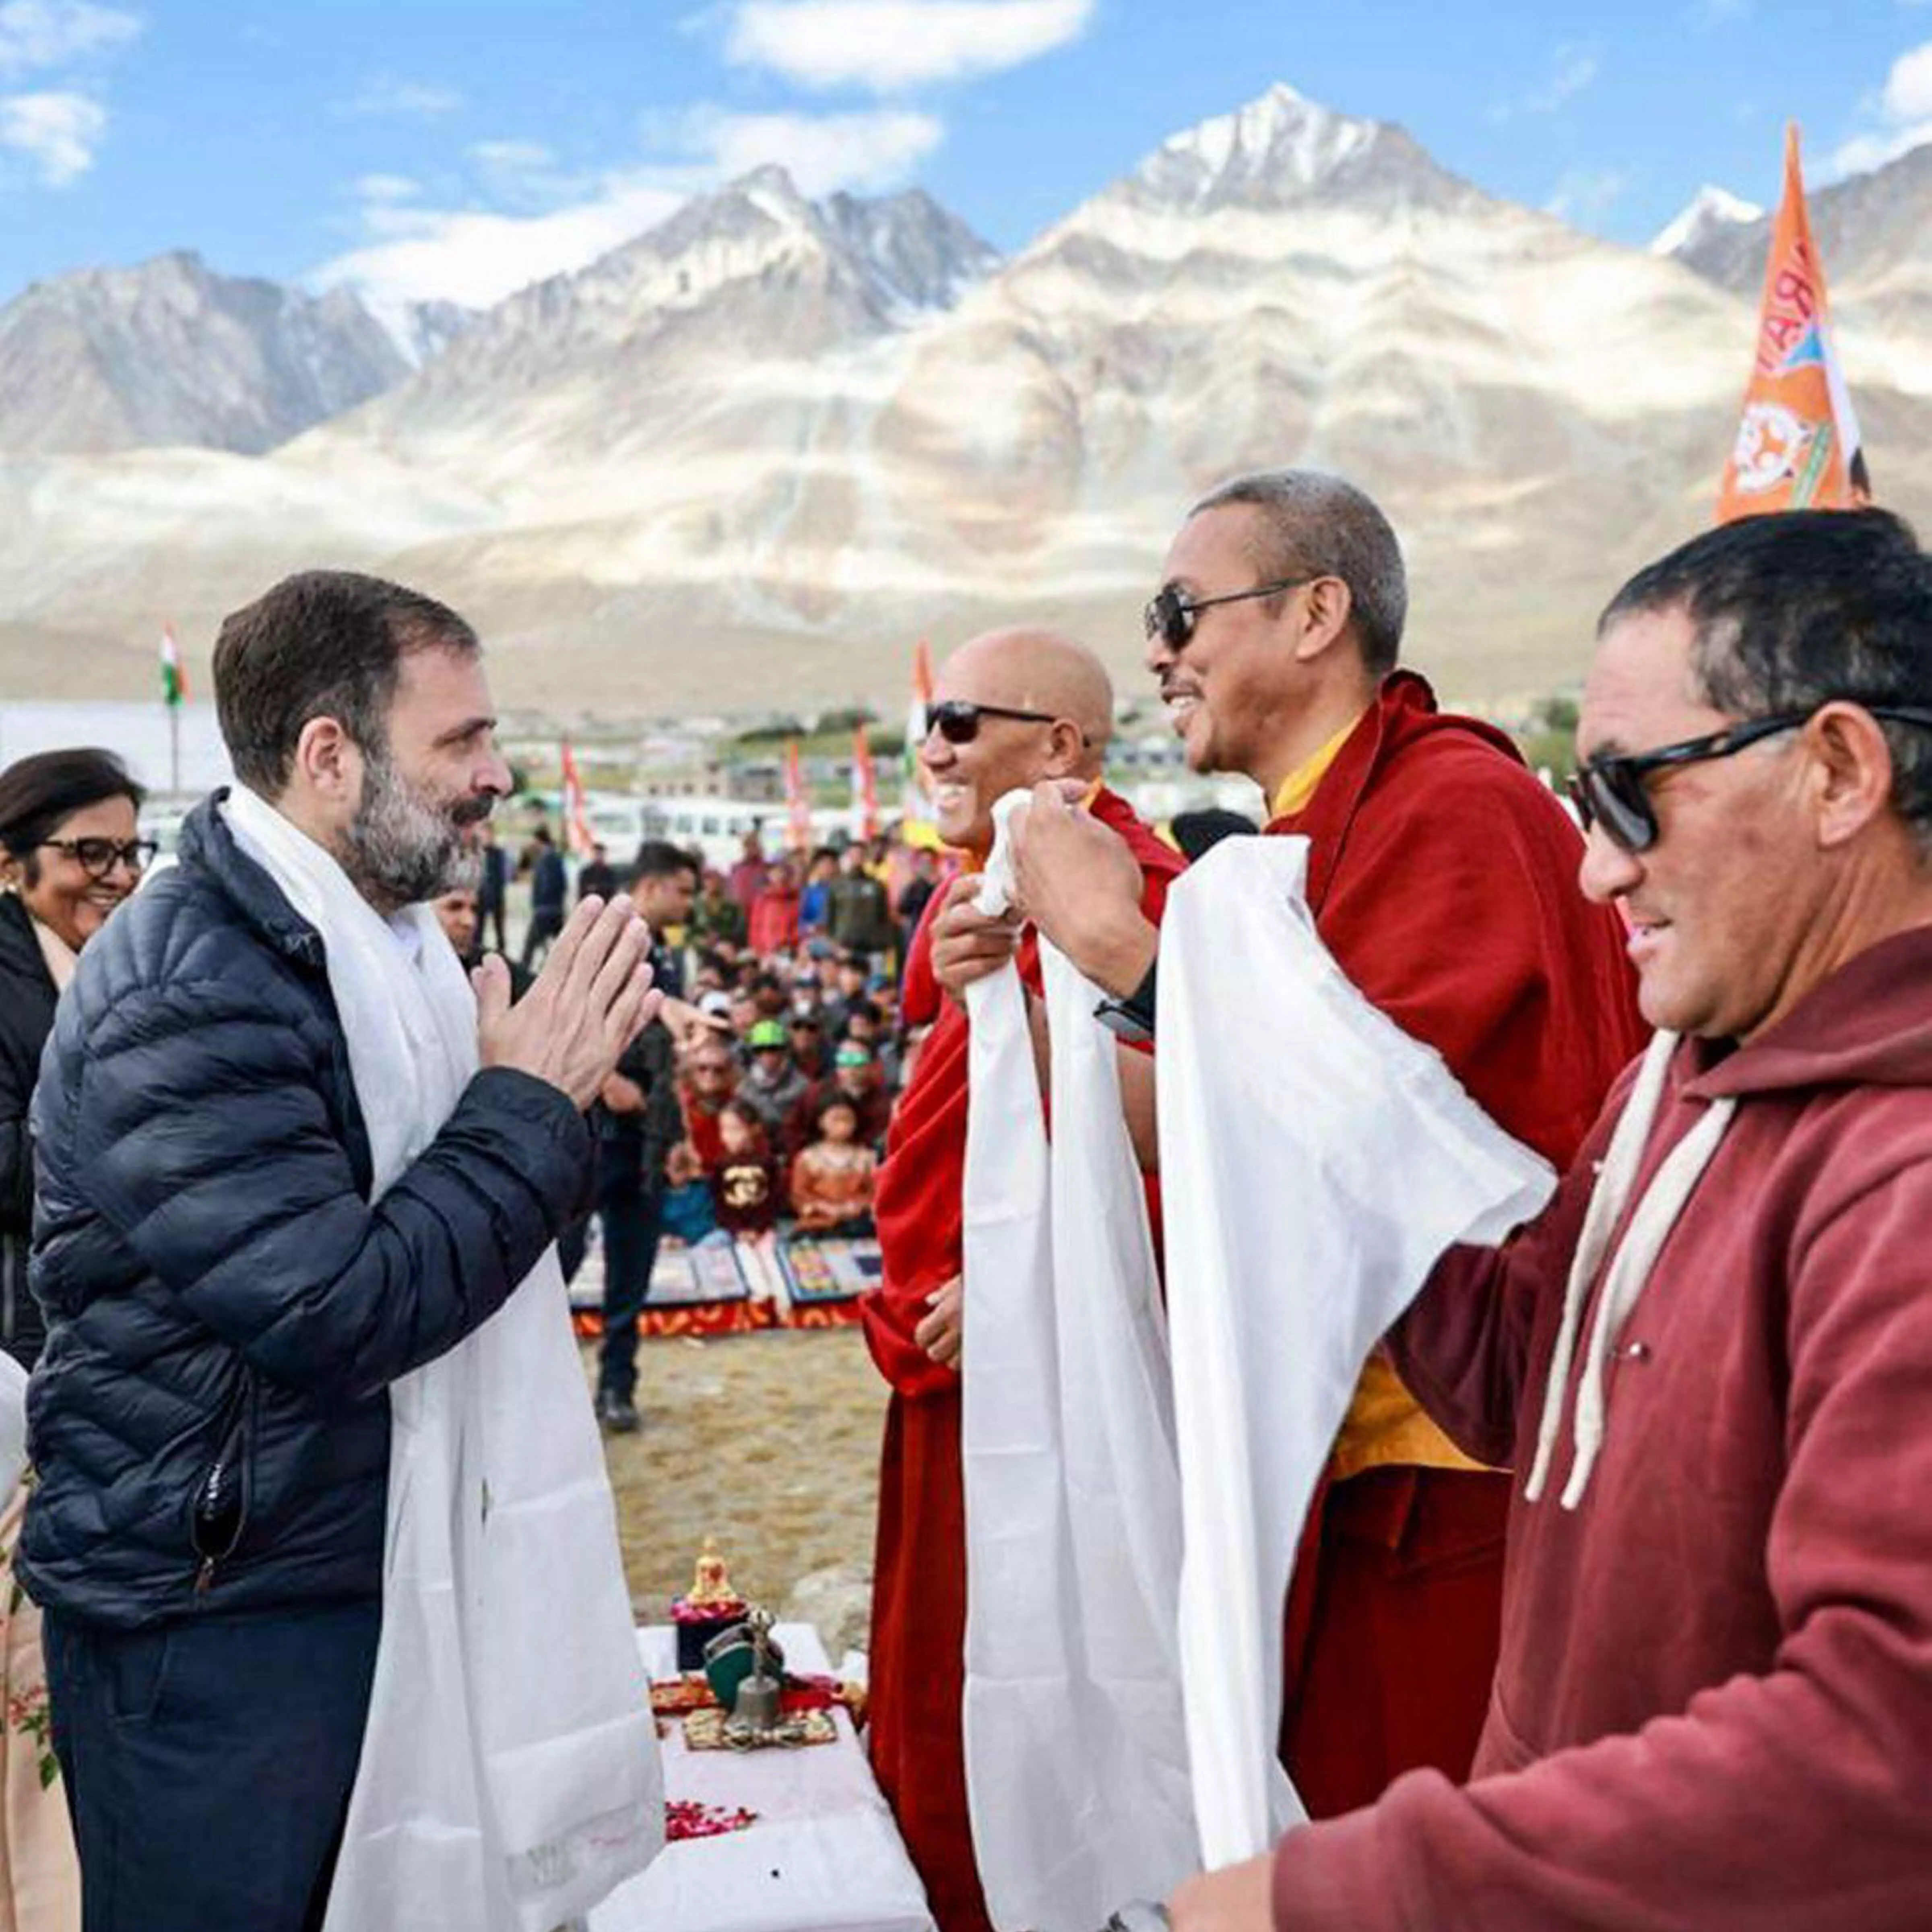 Ladakhis concerned over grazing land taken over by China: Rahul